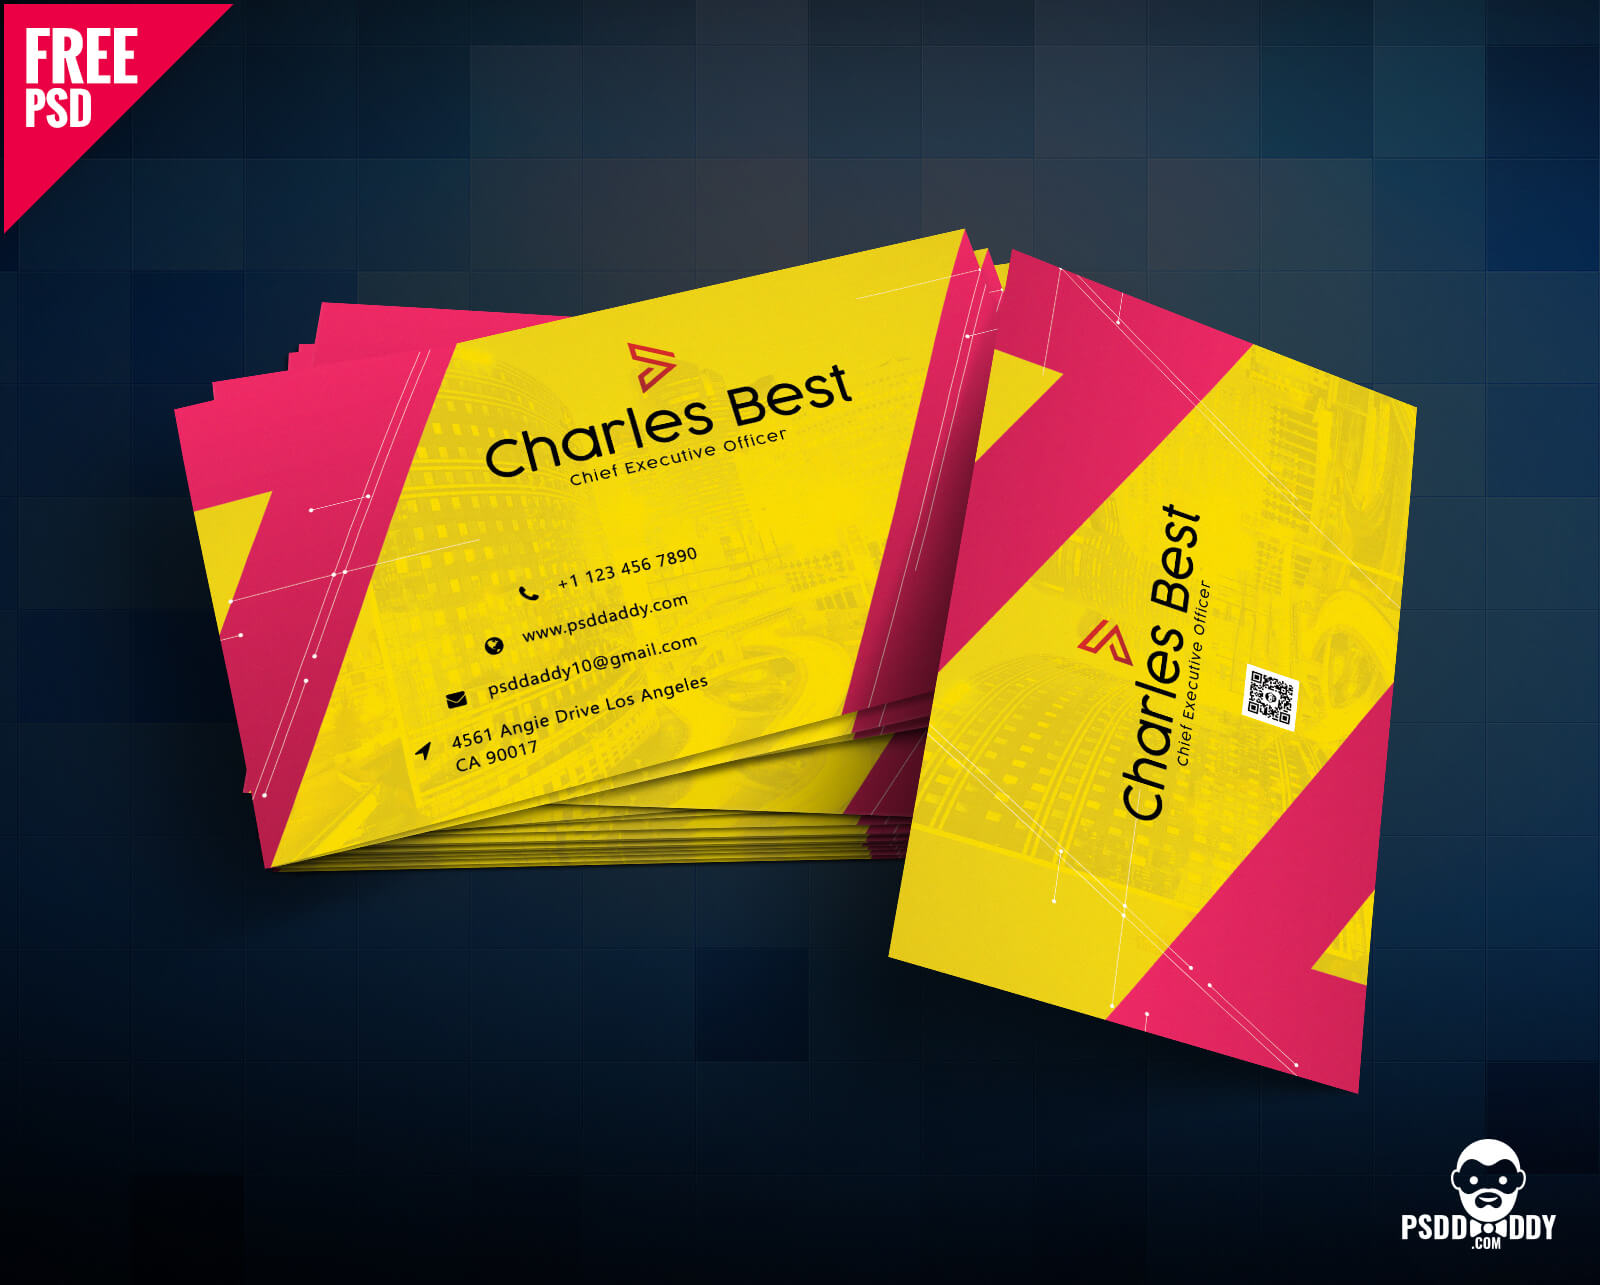 Download] Creative Business Card Free Psd | Psddaddy For Free Psd Visiting Card Templates Download